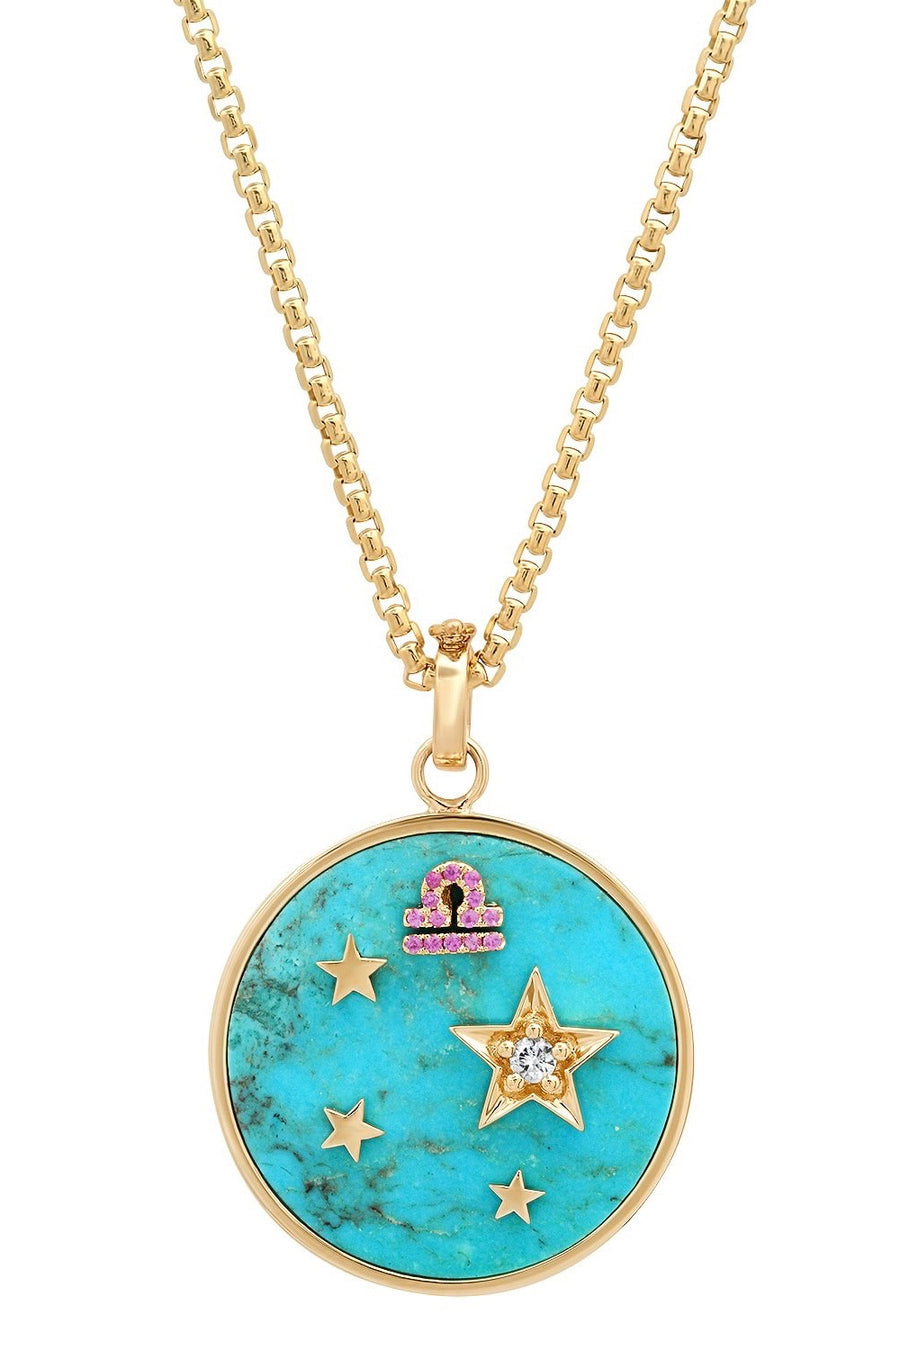 Large Turquoise Zodiac Necklace - Libra on 16” Chain (Other Signs by Special Order)